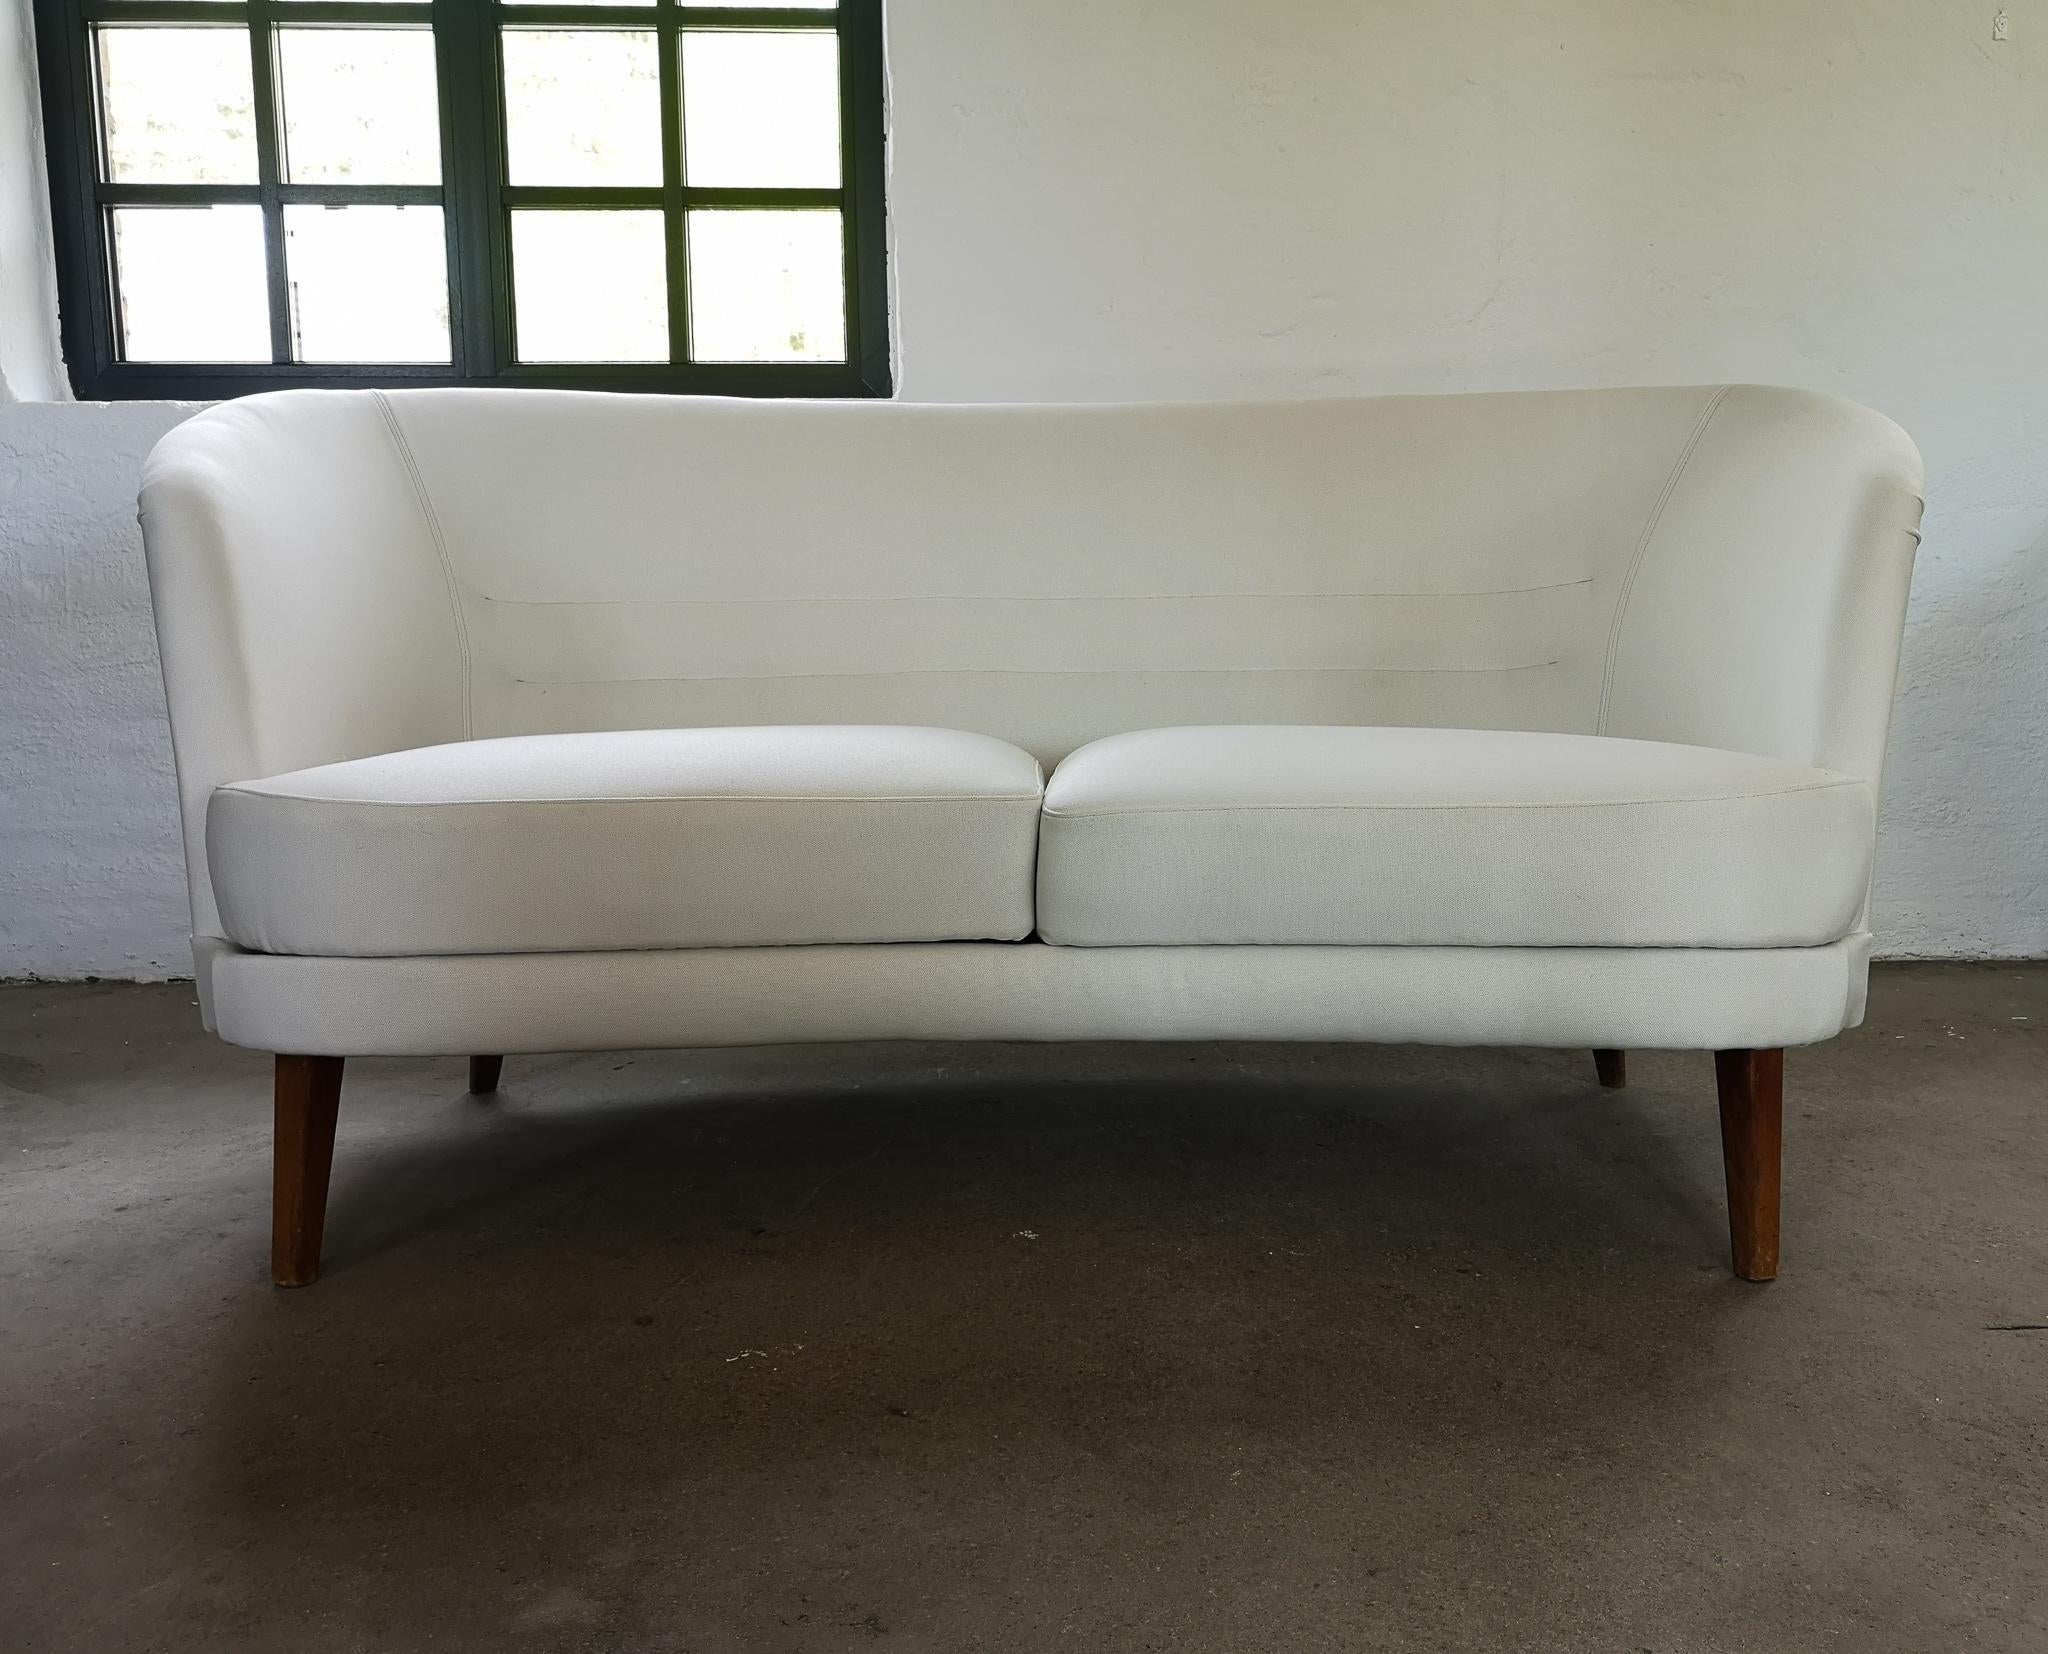 This sofa and chair were made at Olof Persson Fåtöljiundustri in Sweden during the early 1950. The curves on this furniture is amazing. The sofa and chair are both reupholstered with new fabric made in Sweden and work made by professional.

New